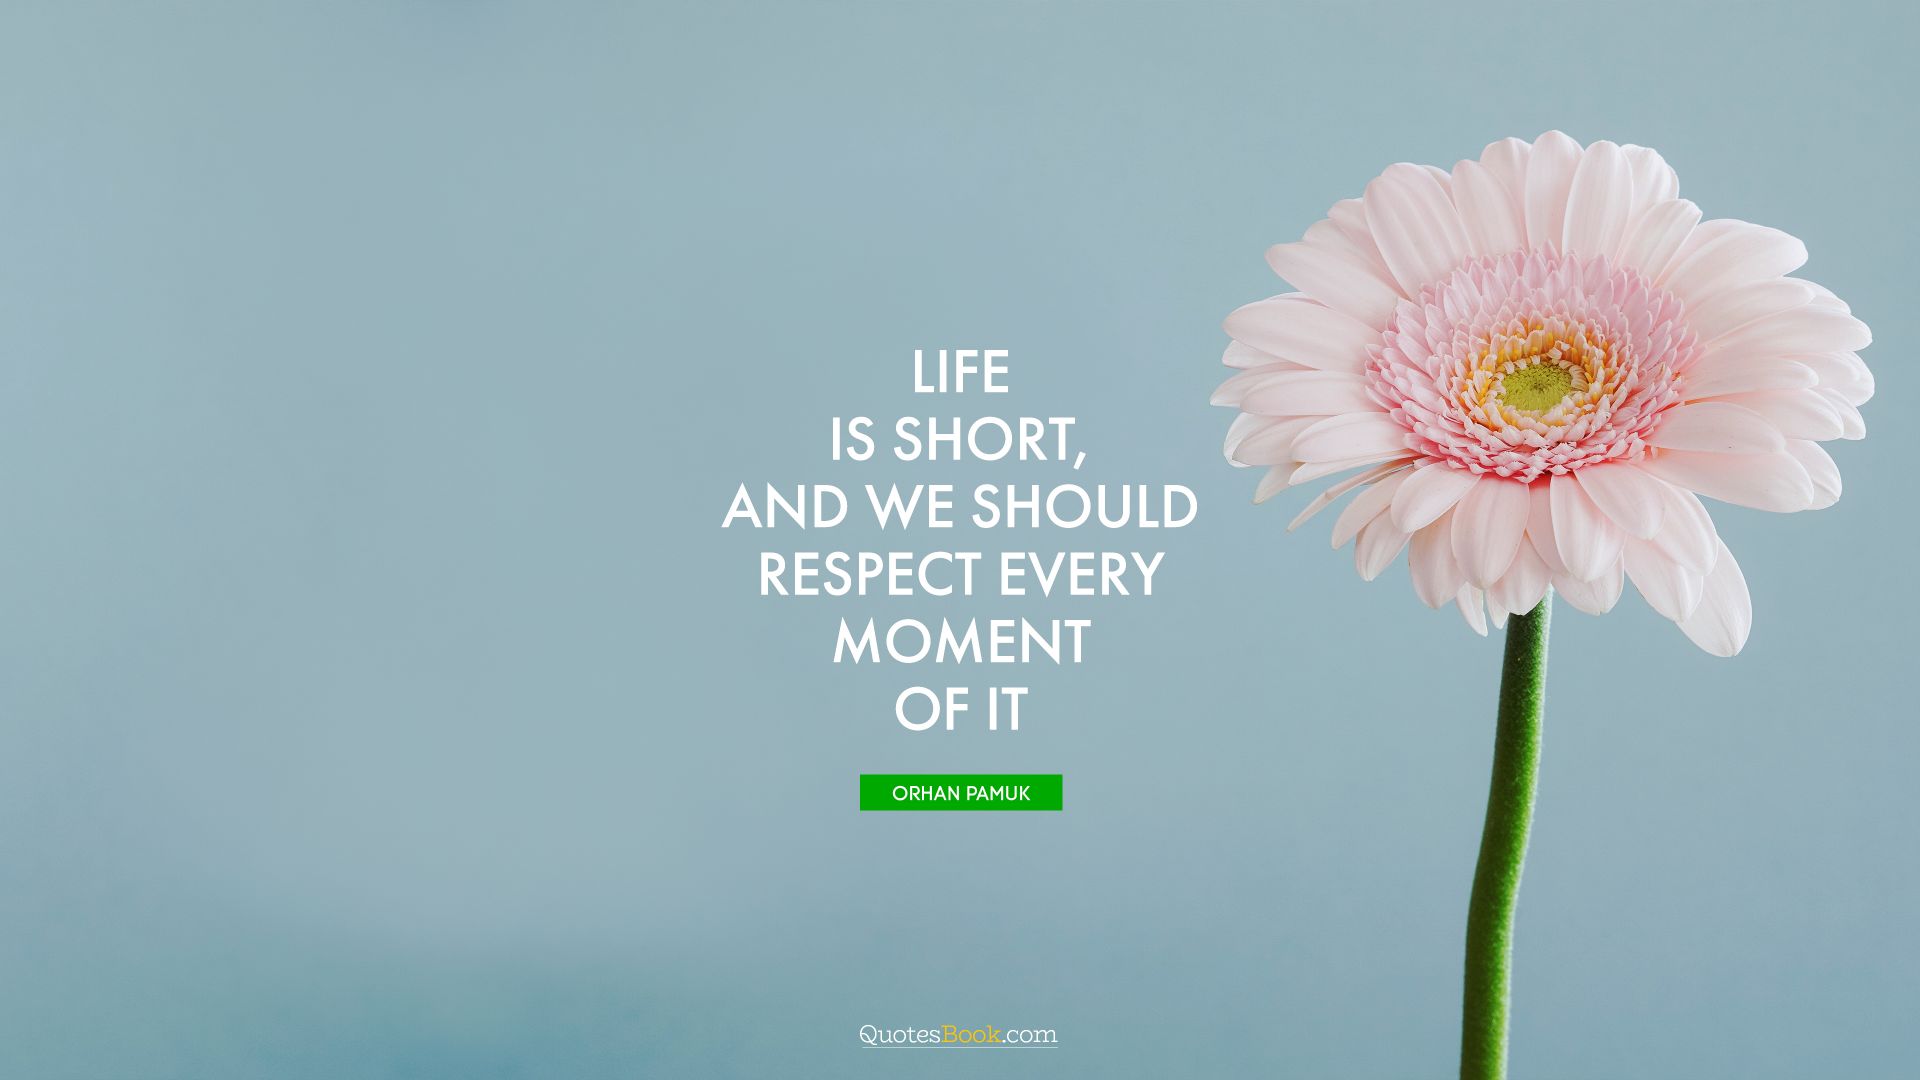 Life is short, and we should respect every moment of it. - Quote by Orhan Pamuk